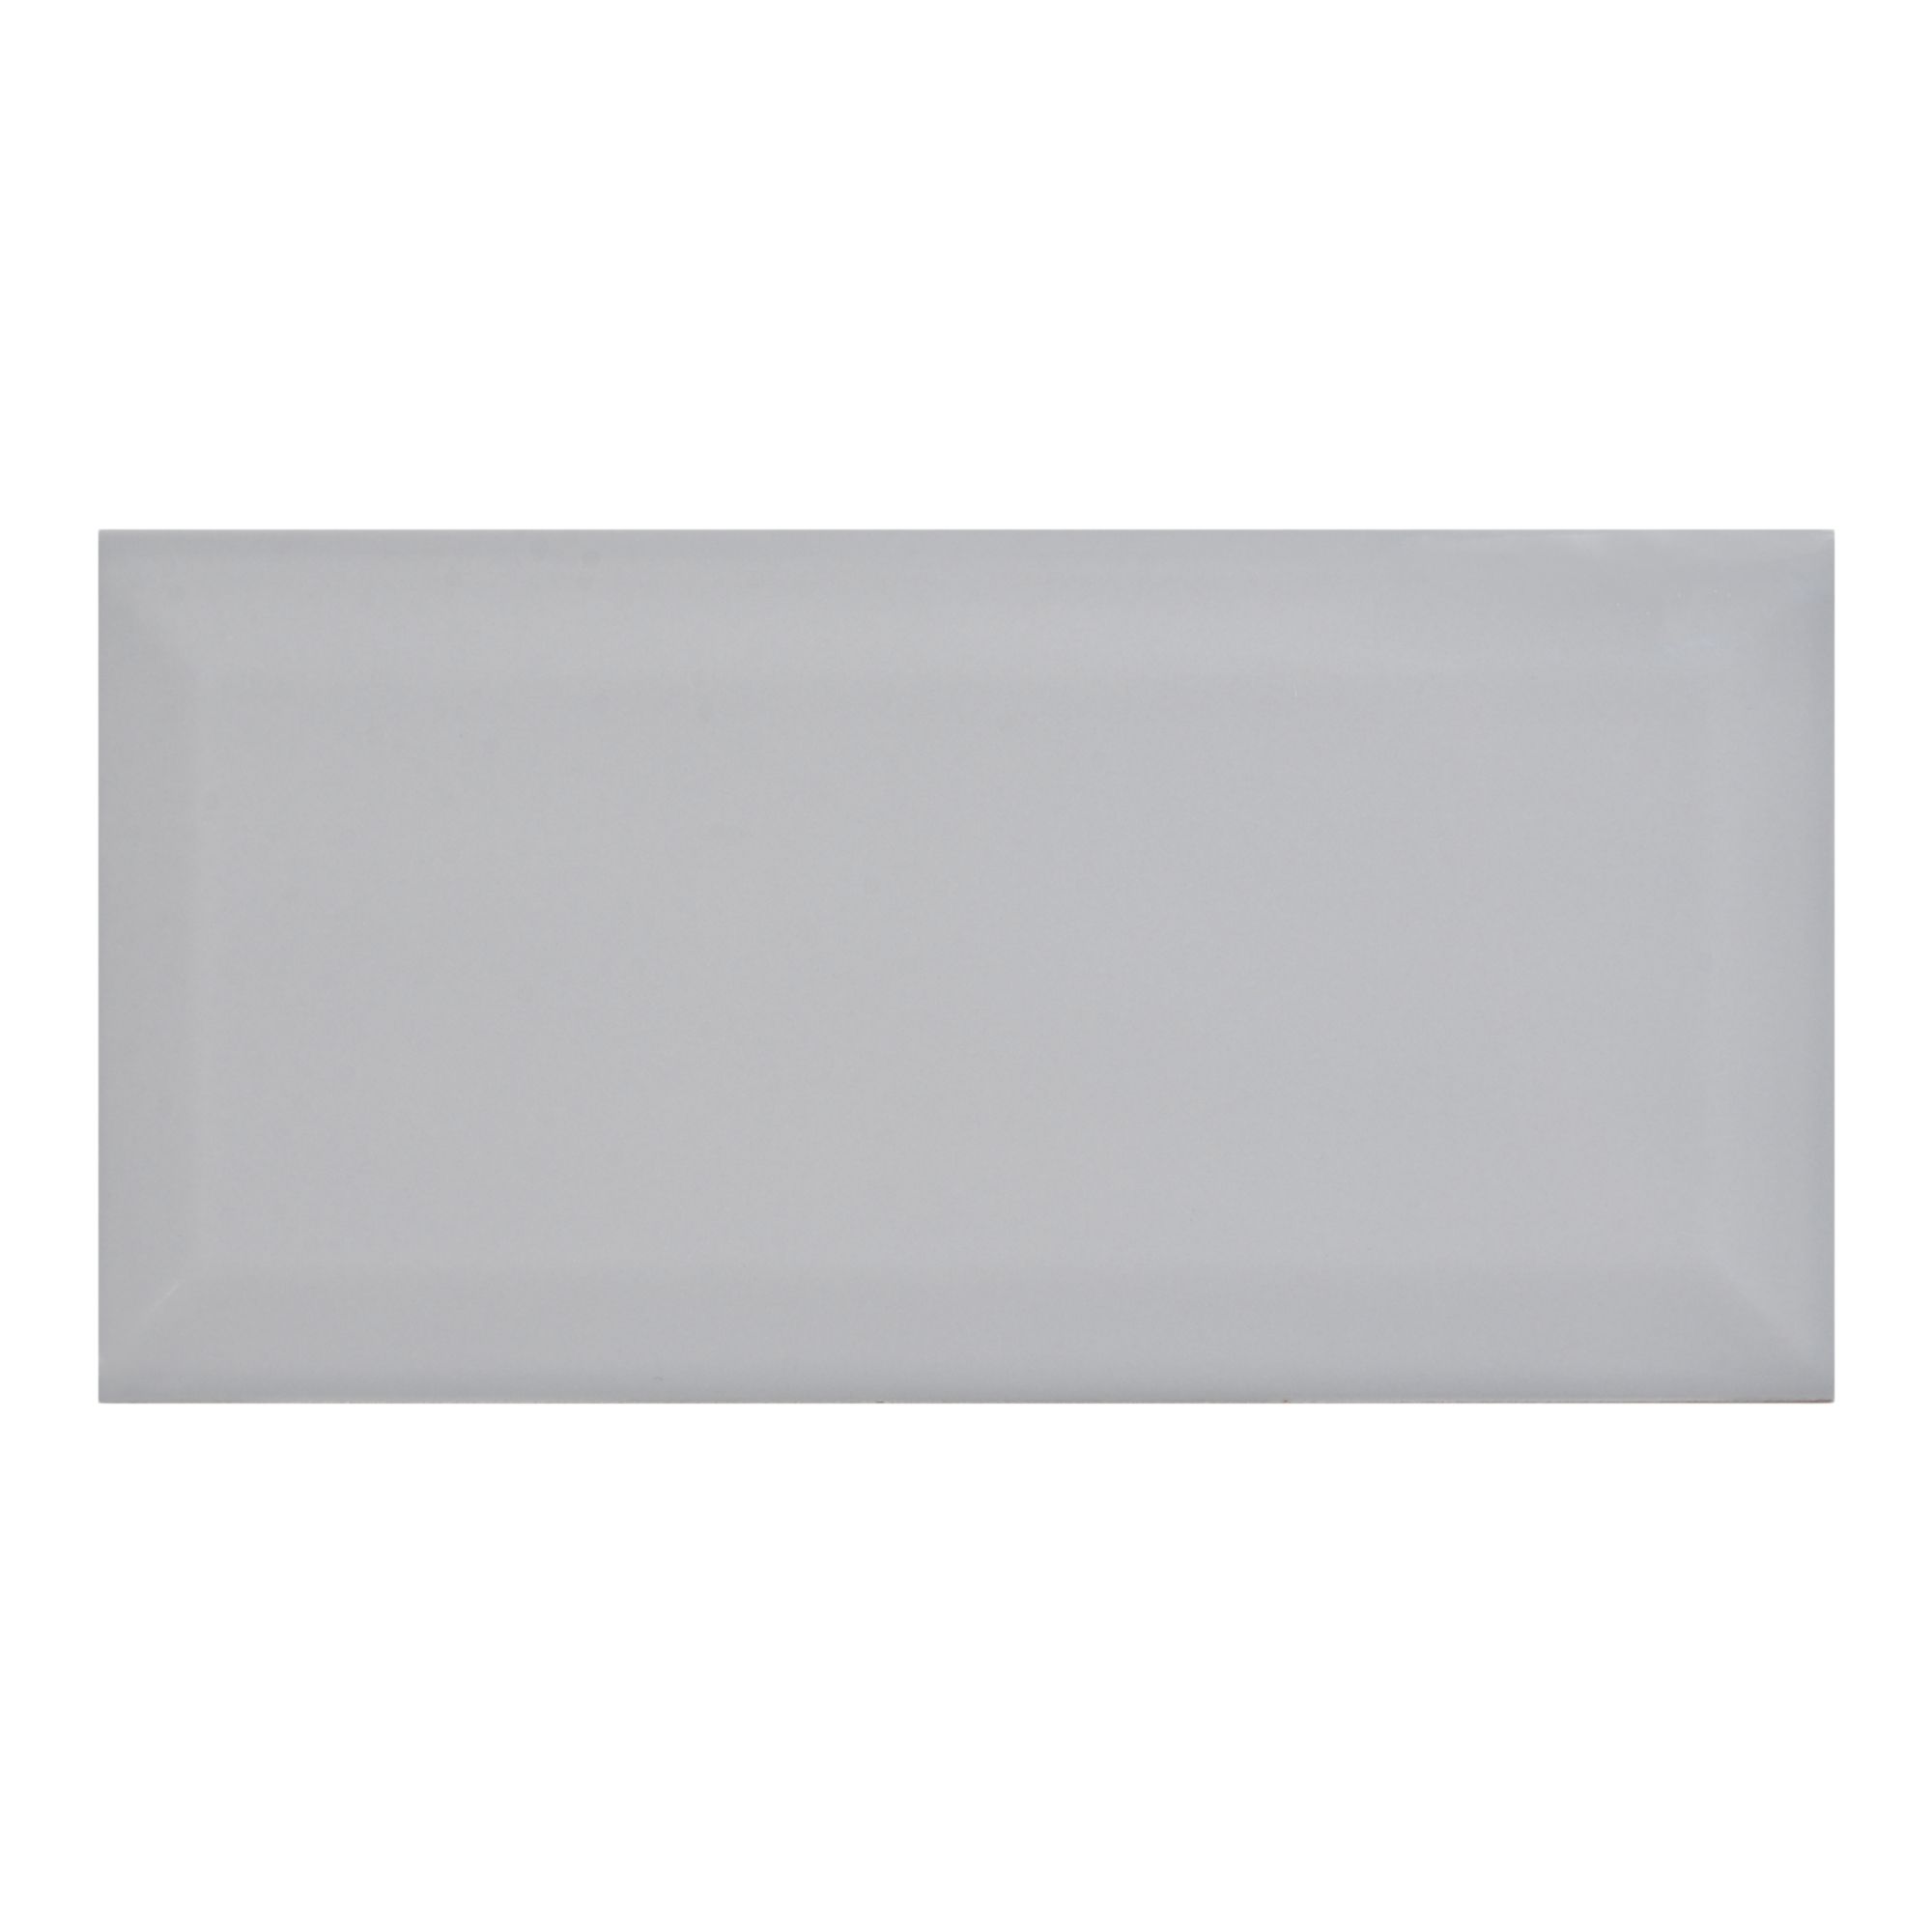 Trentie Taupe Gloss Metro Ceramic Wall tile, Pack of 40, (L)200mm (W)100mm